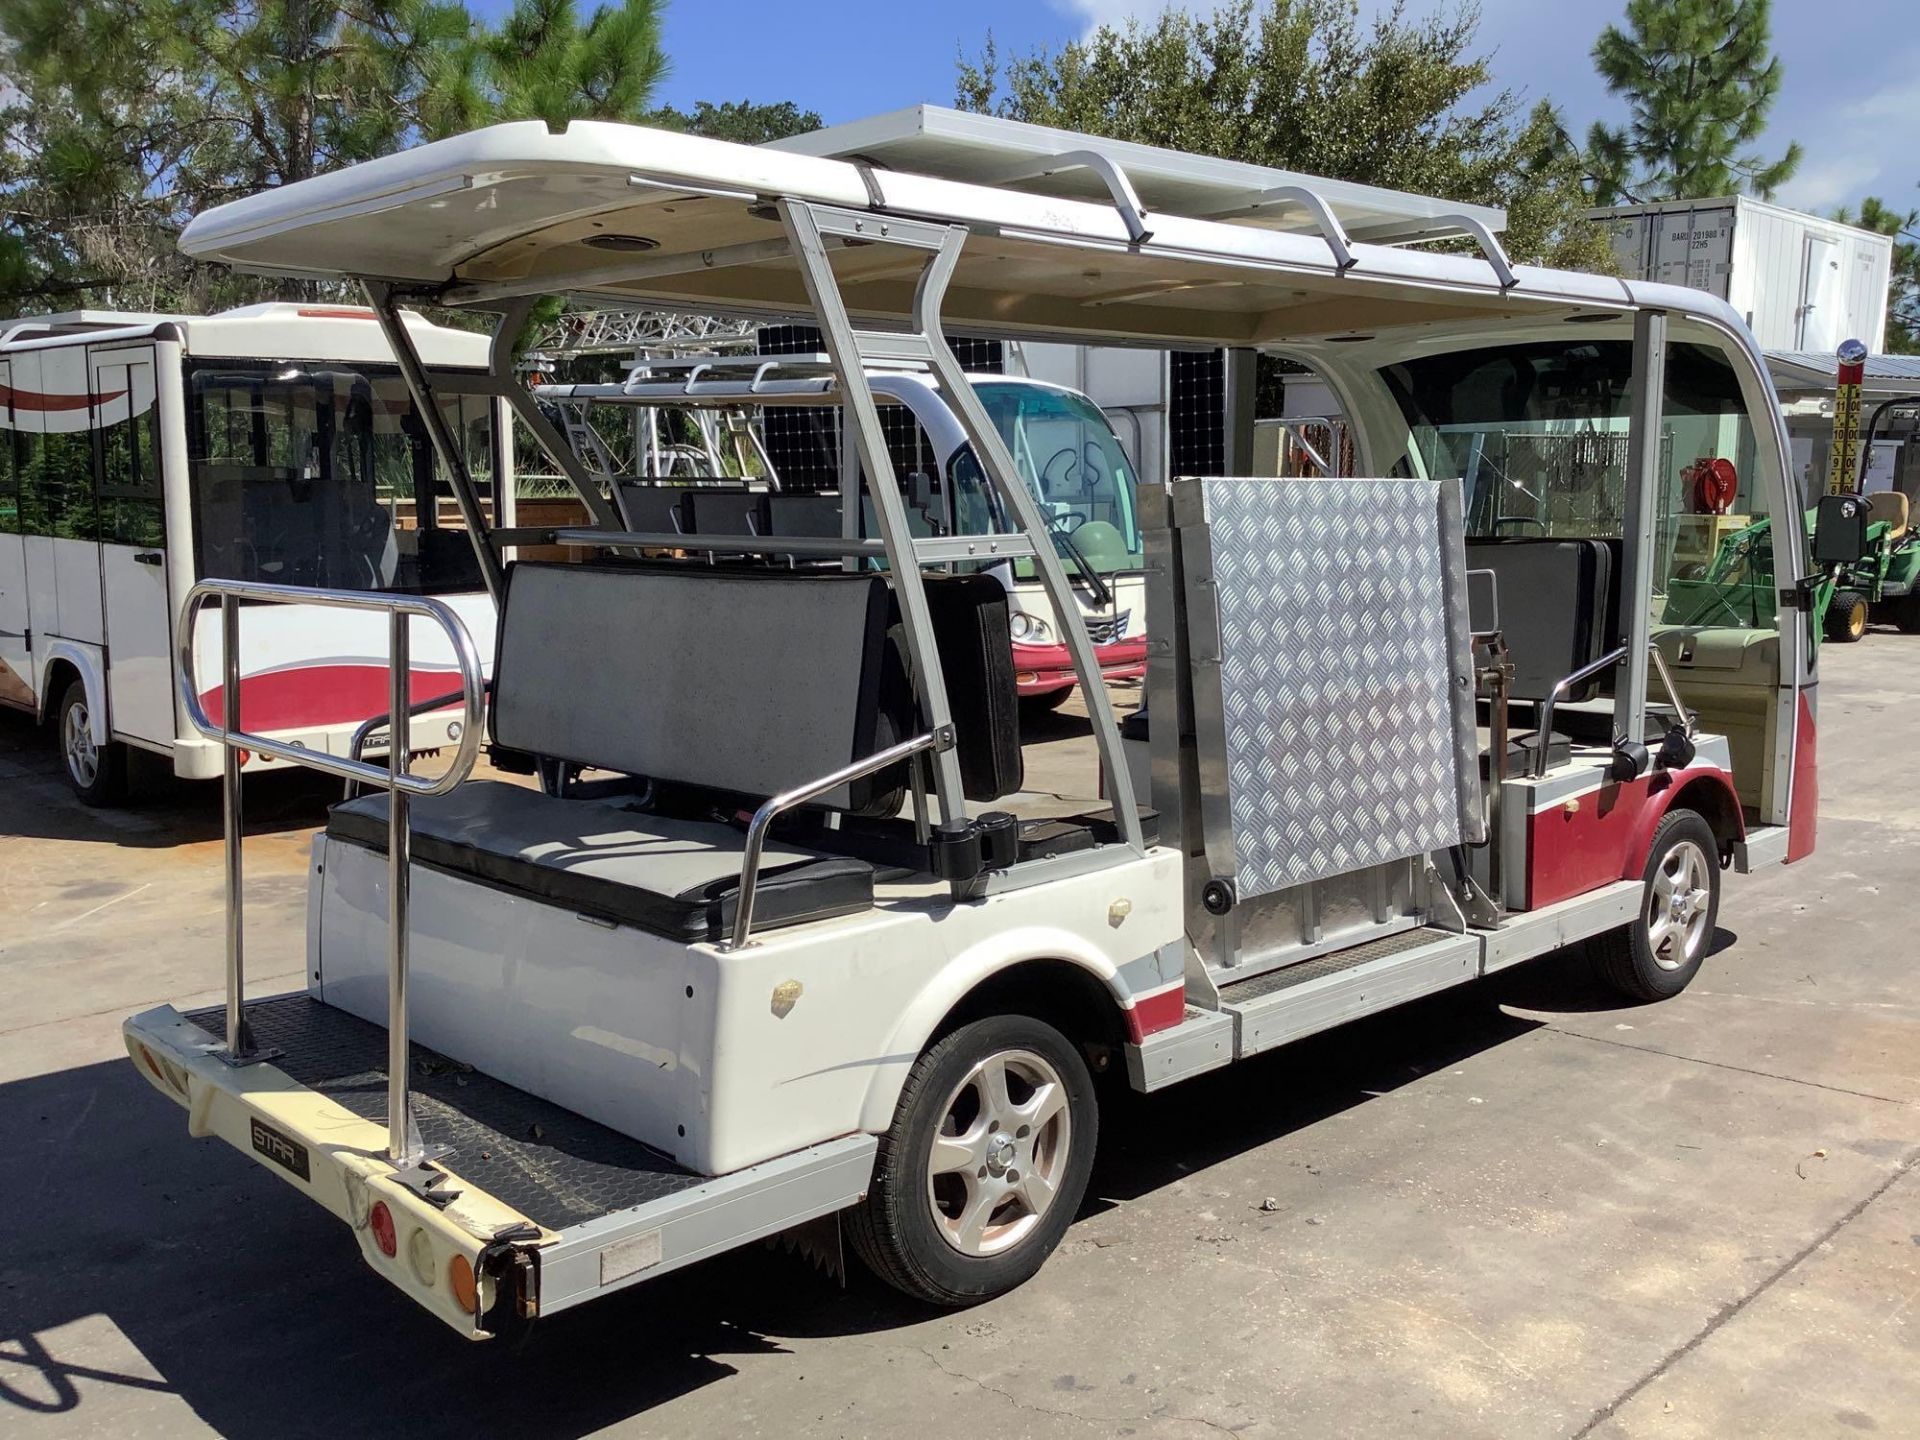 2015 STAR EV SHUTTLE CART MODEL STAR-BN72-11-AC-WHEELCHAIR, ELECTRIC, SOLA PANEL ATTACHED, DOME LIGH - Image 8 of 40